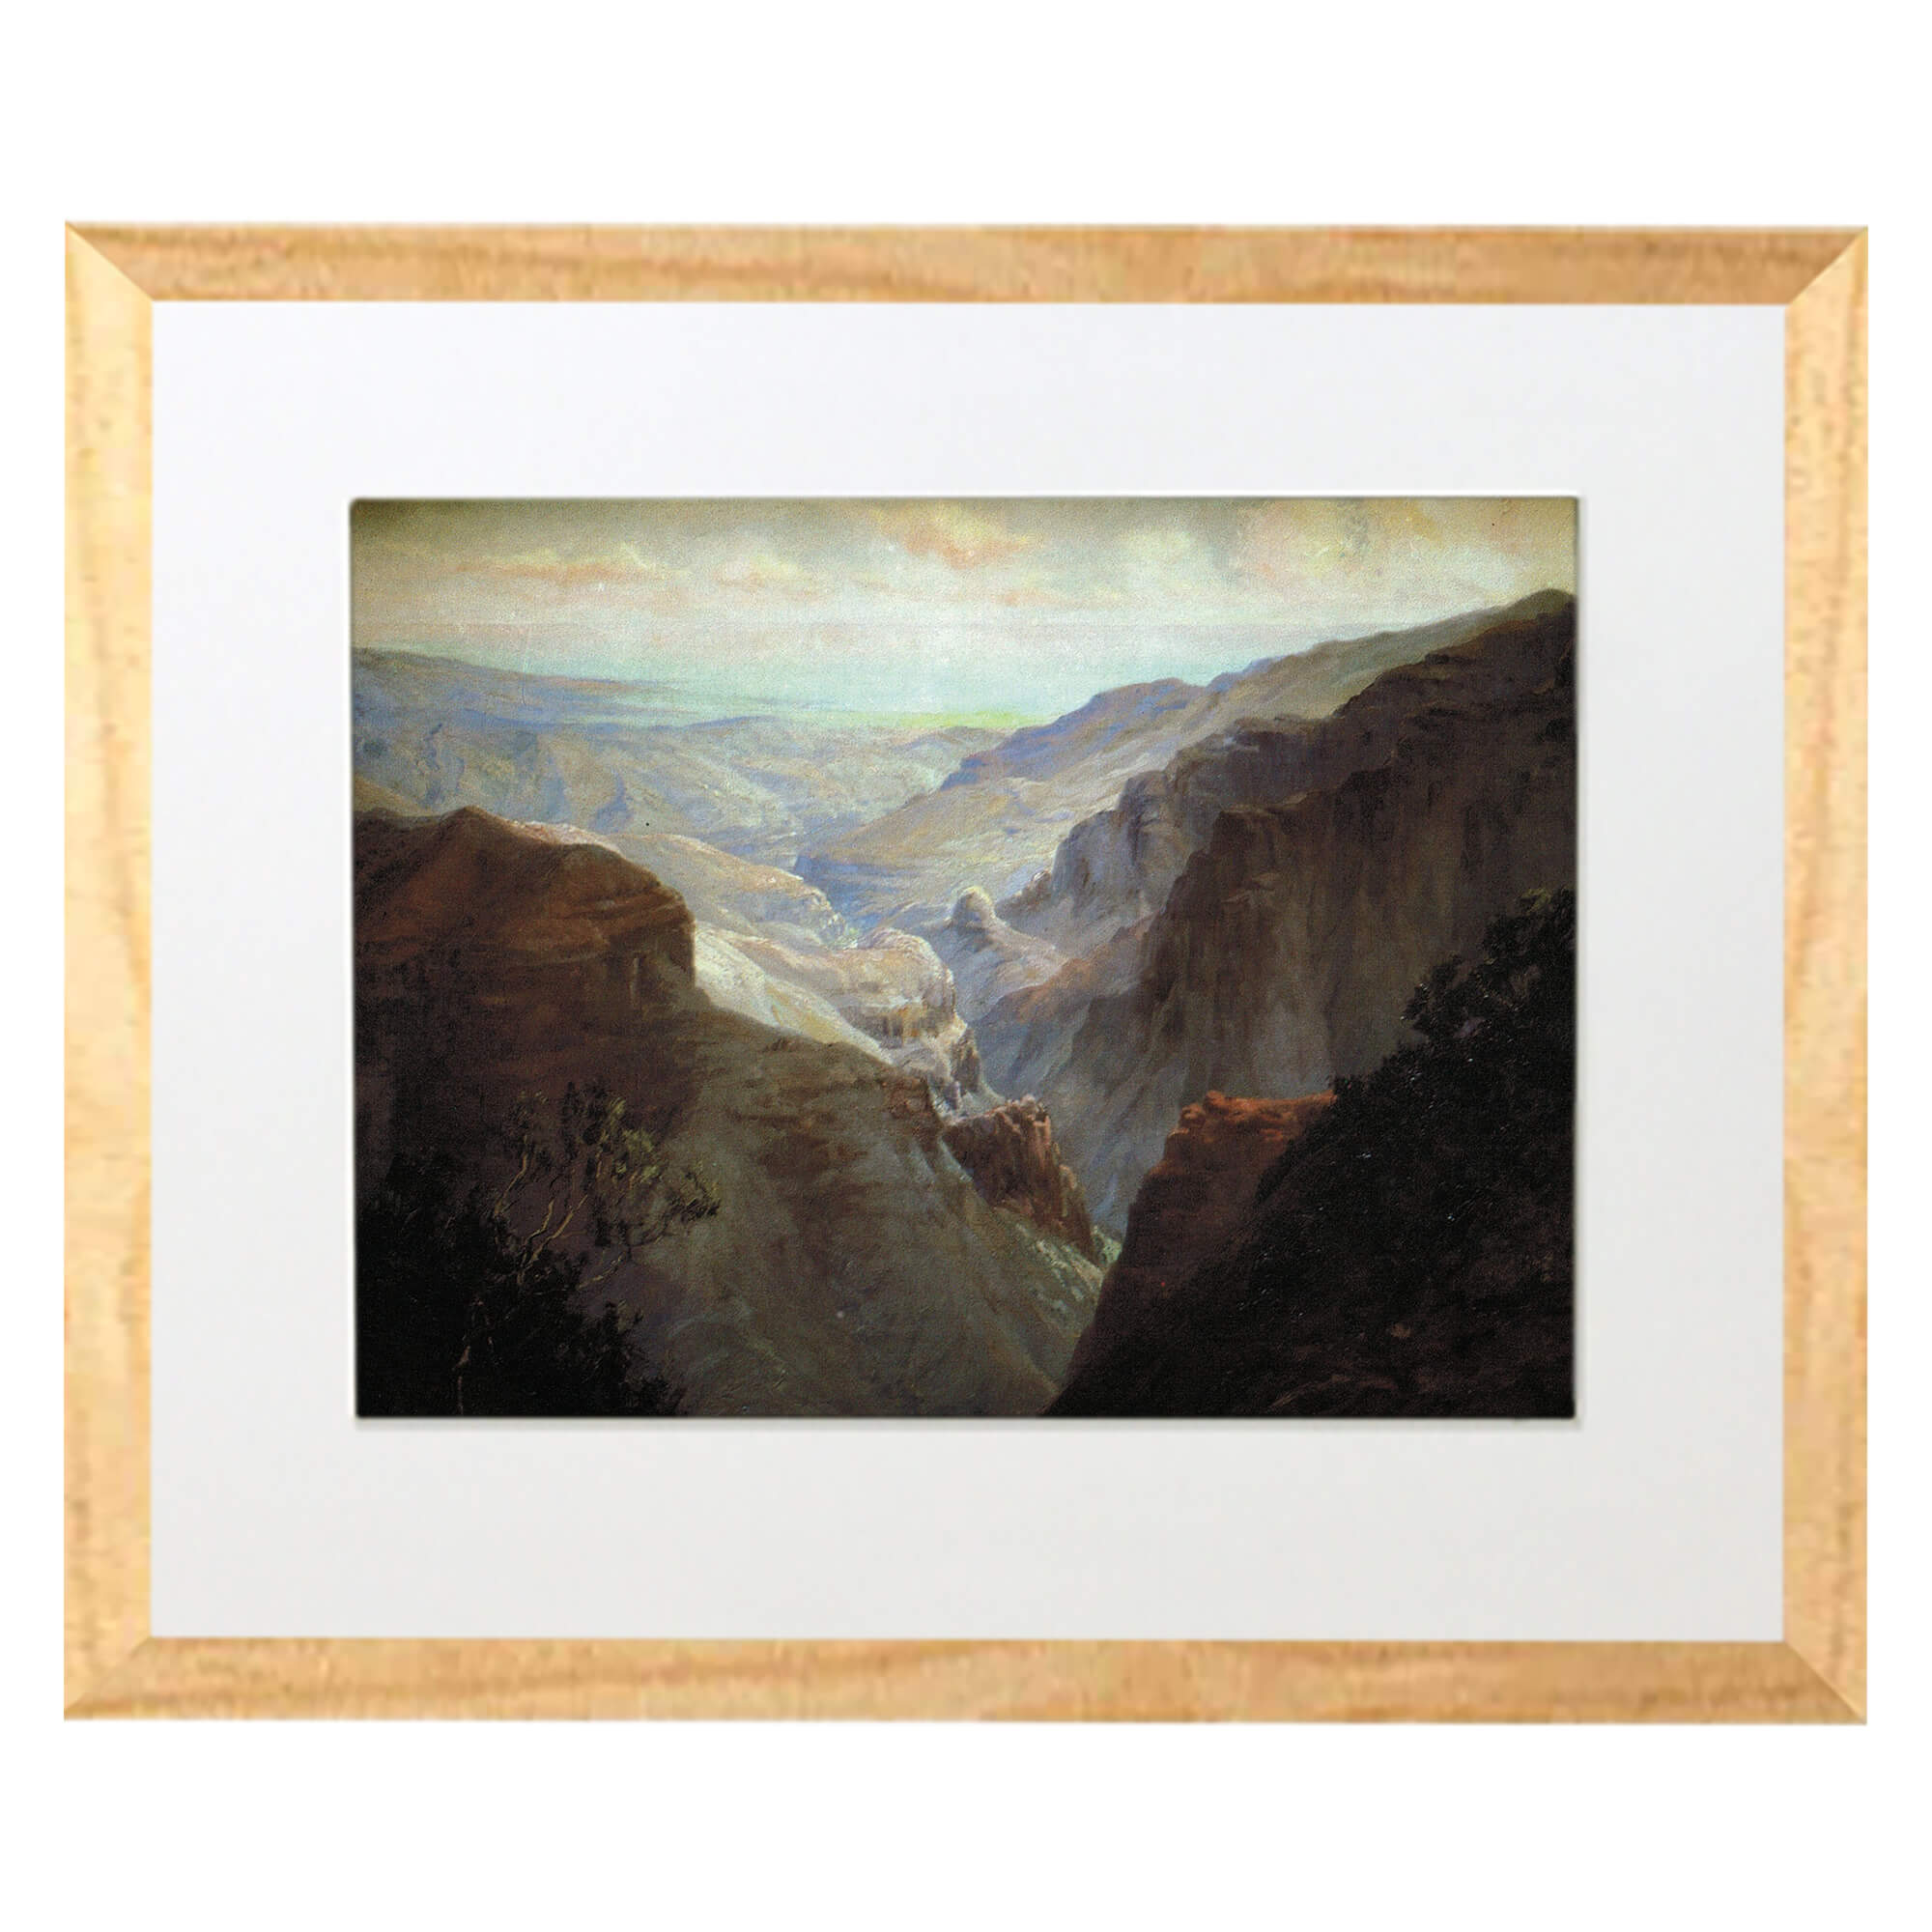 Matted art print with wood frame showcasing towering mountains by hawaii artist  David Hitchcock